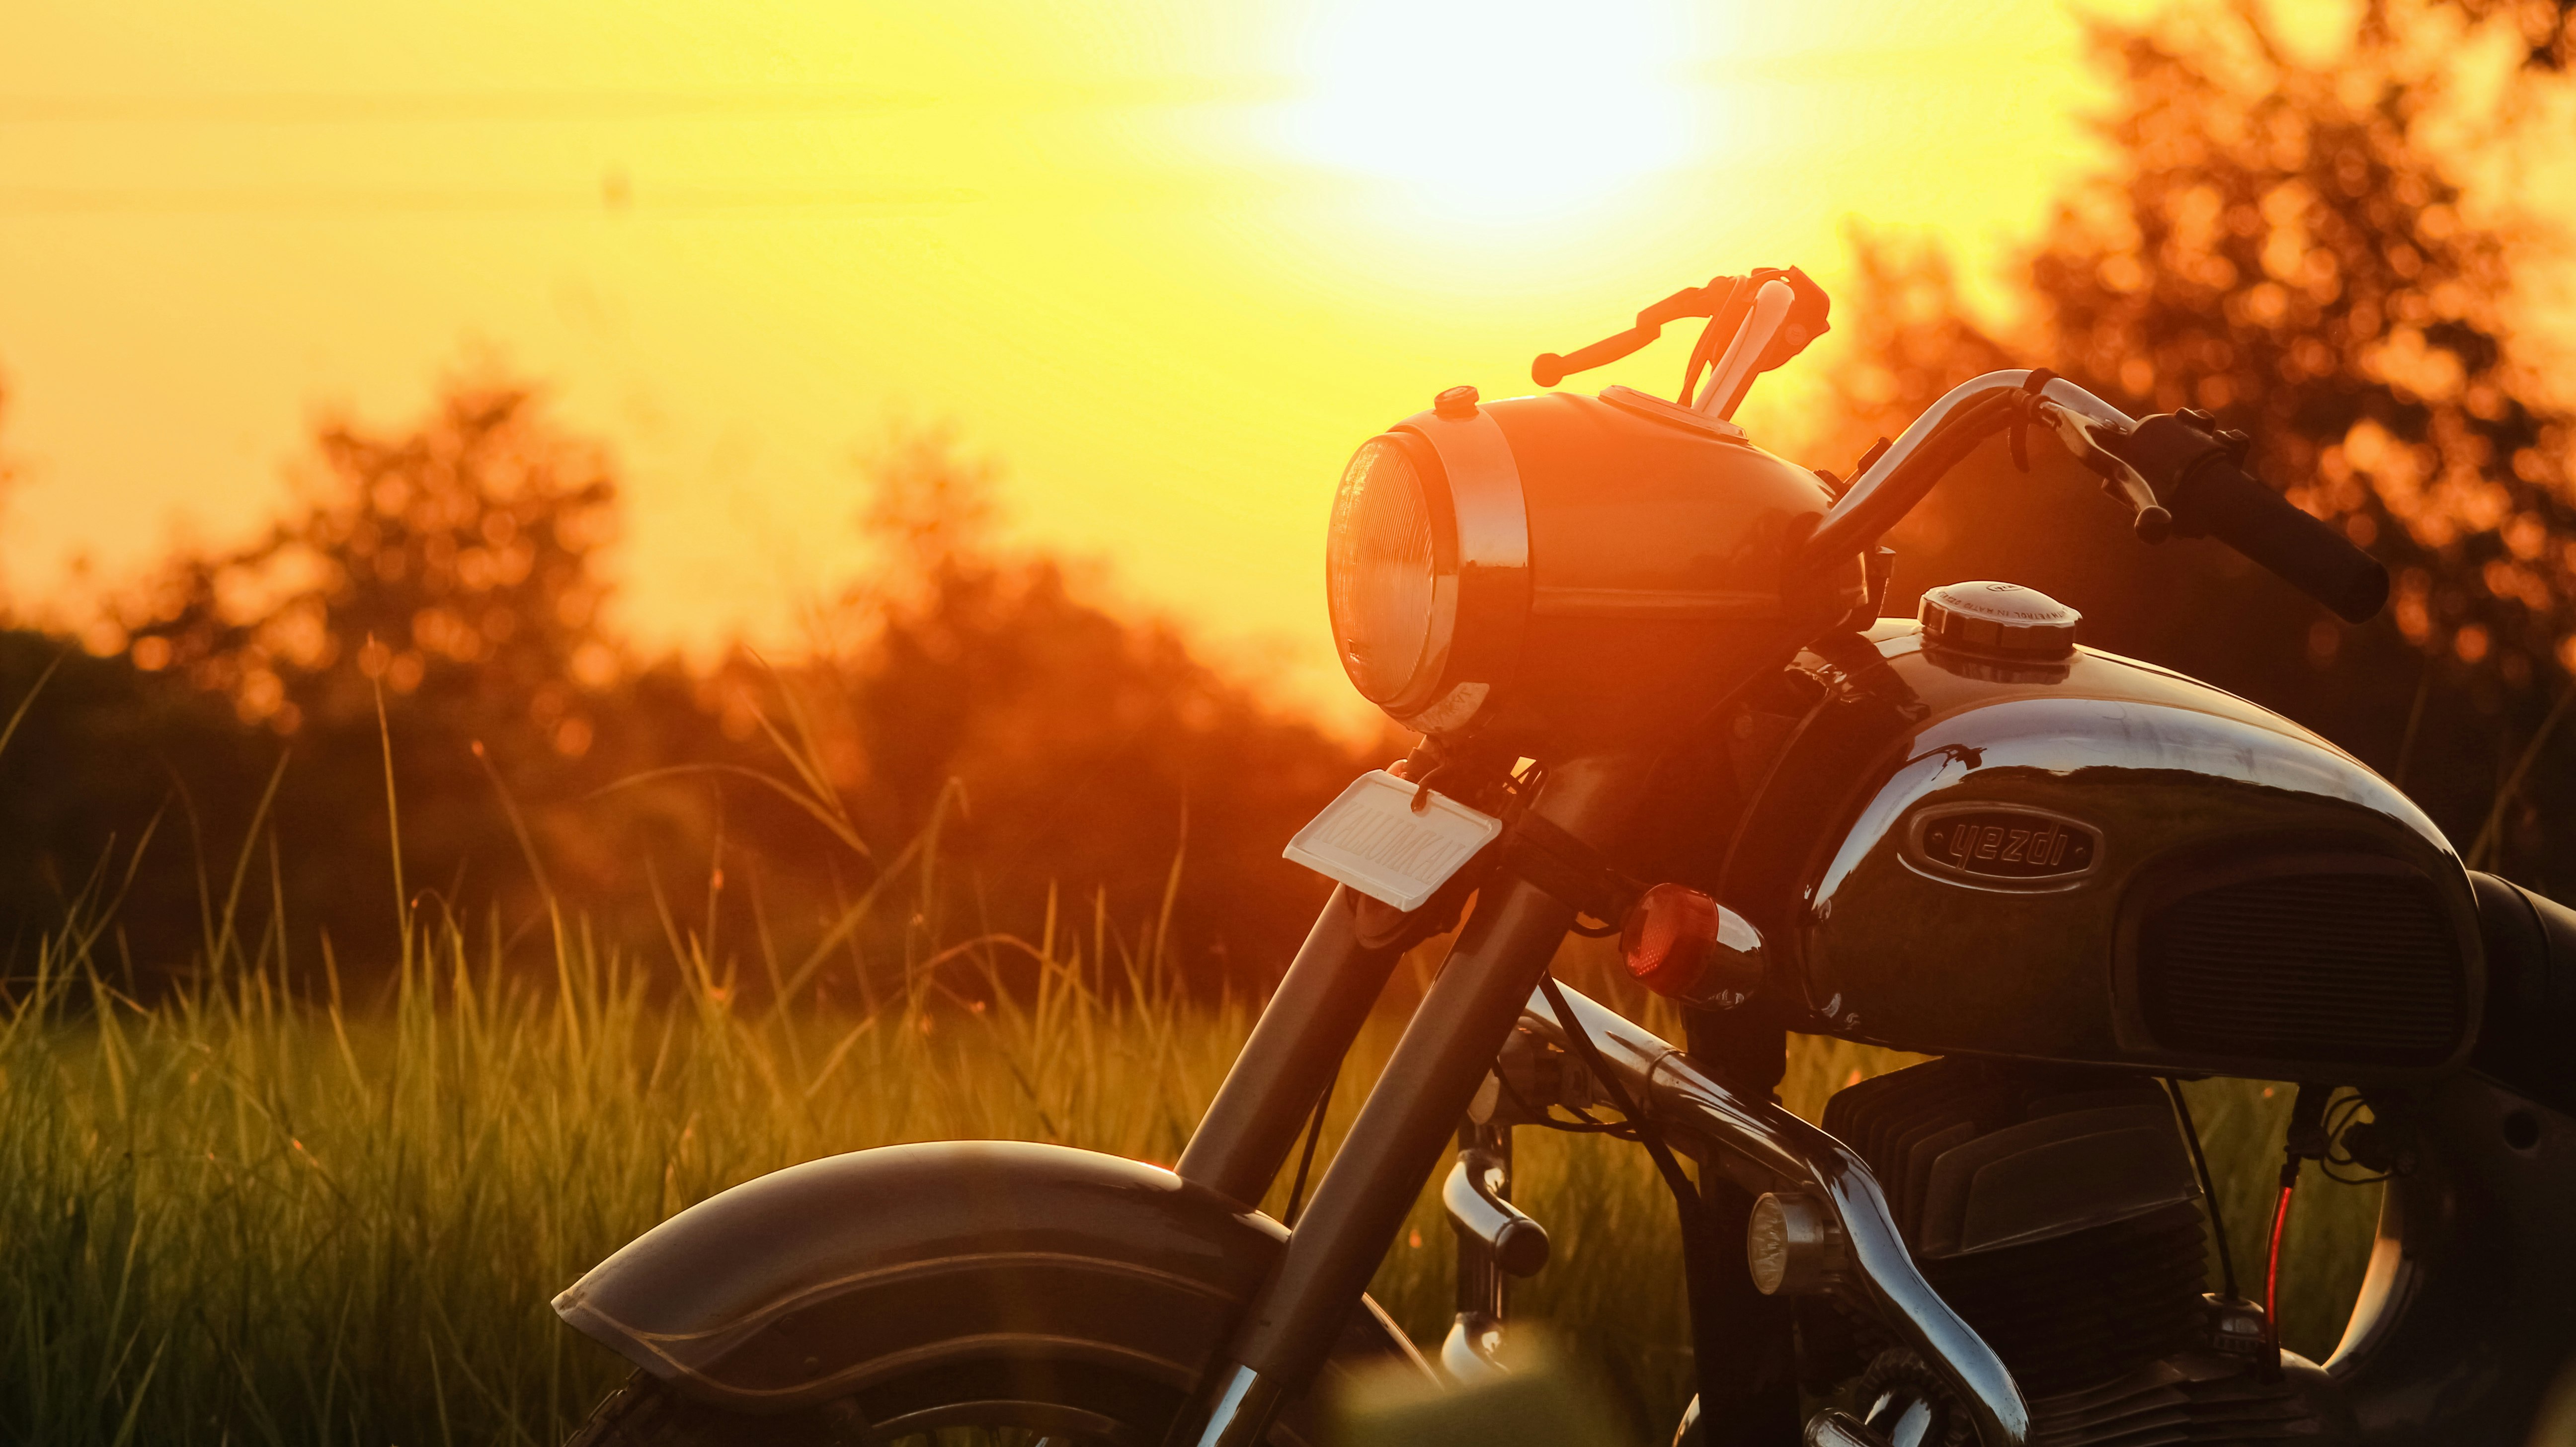 red motorcycle on green grass field during sunset